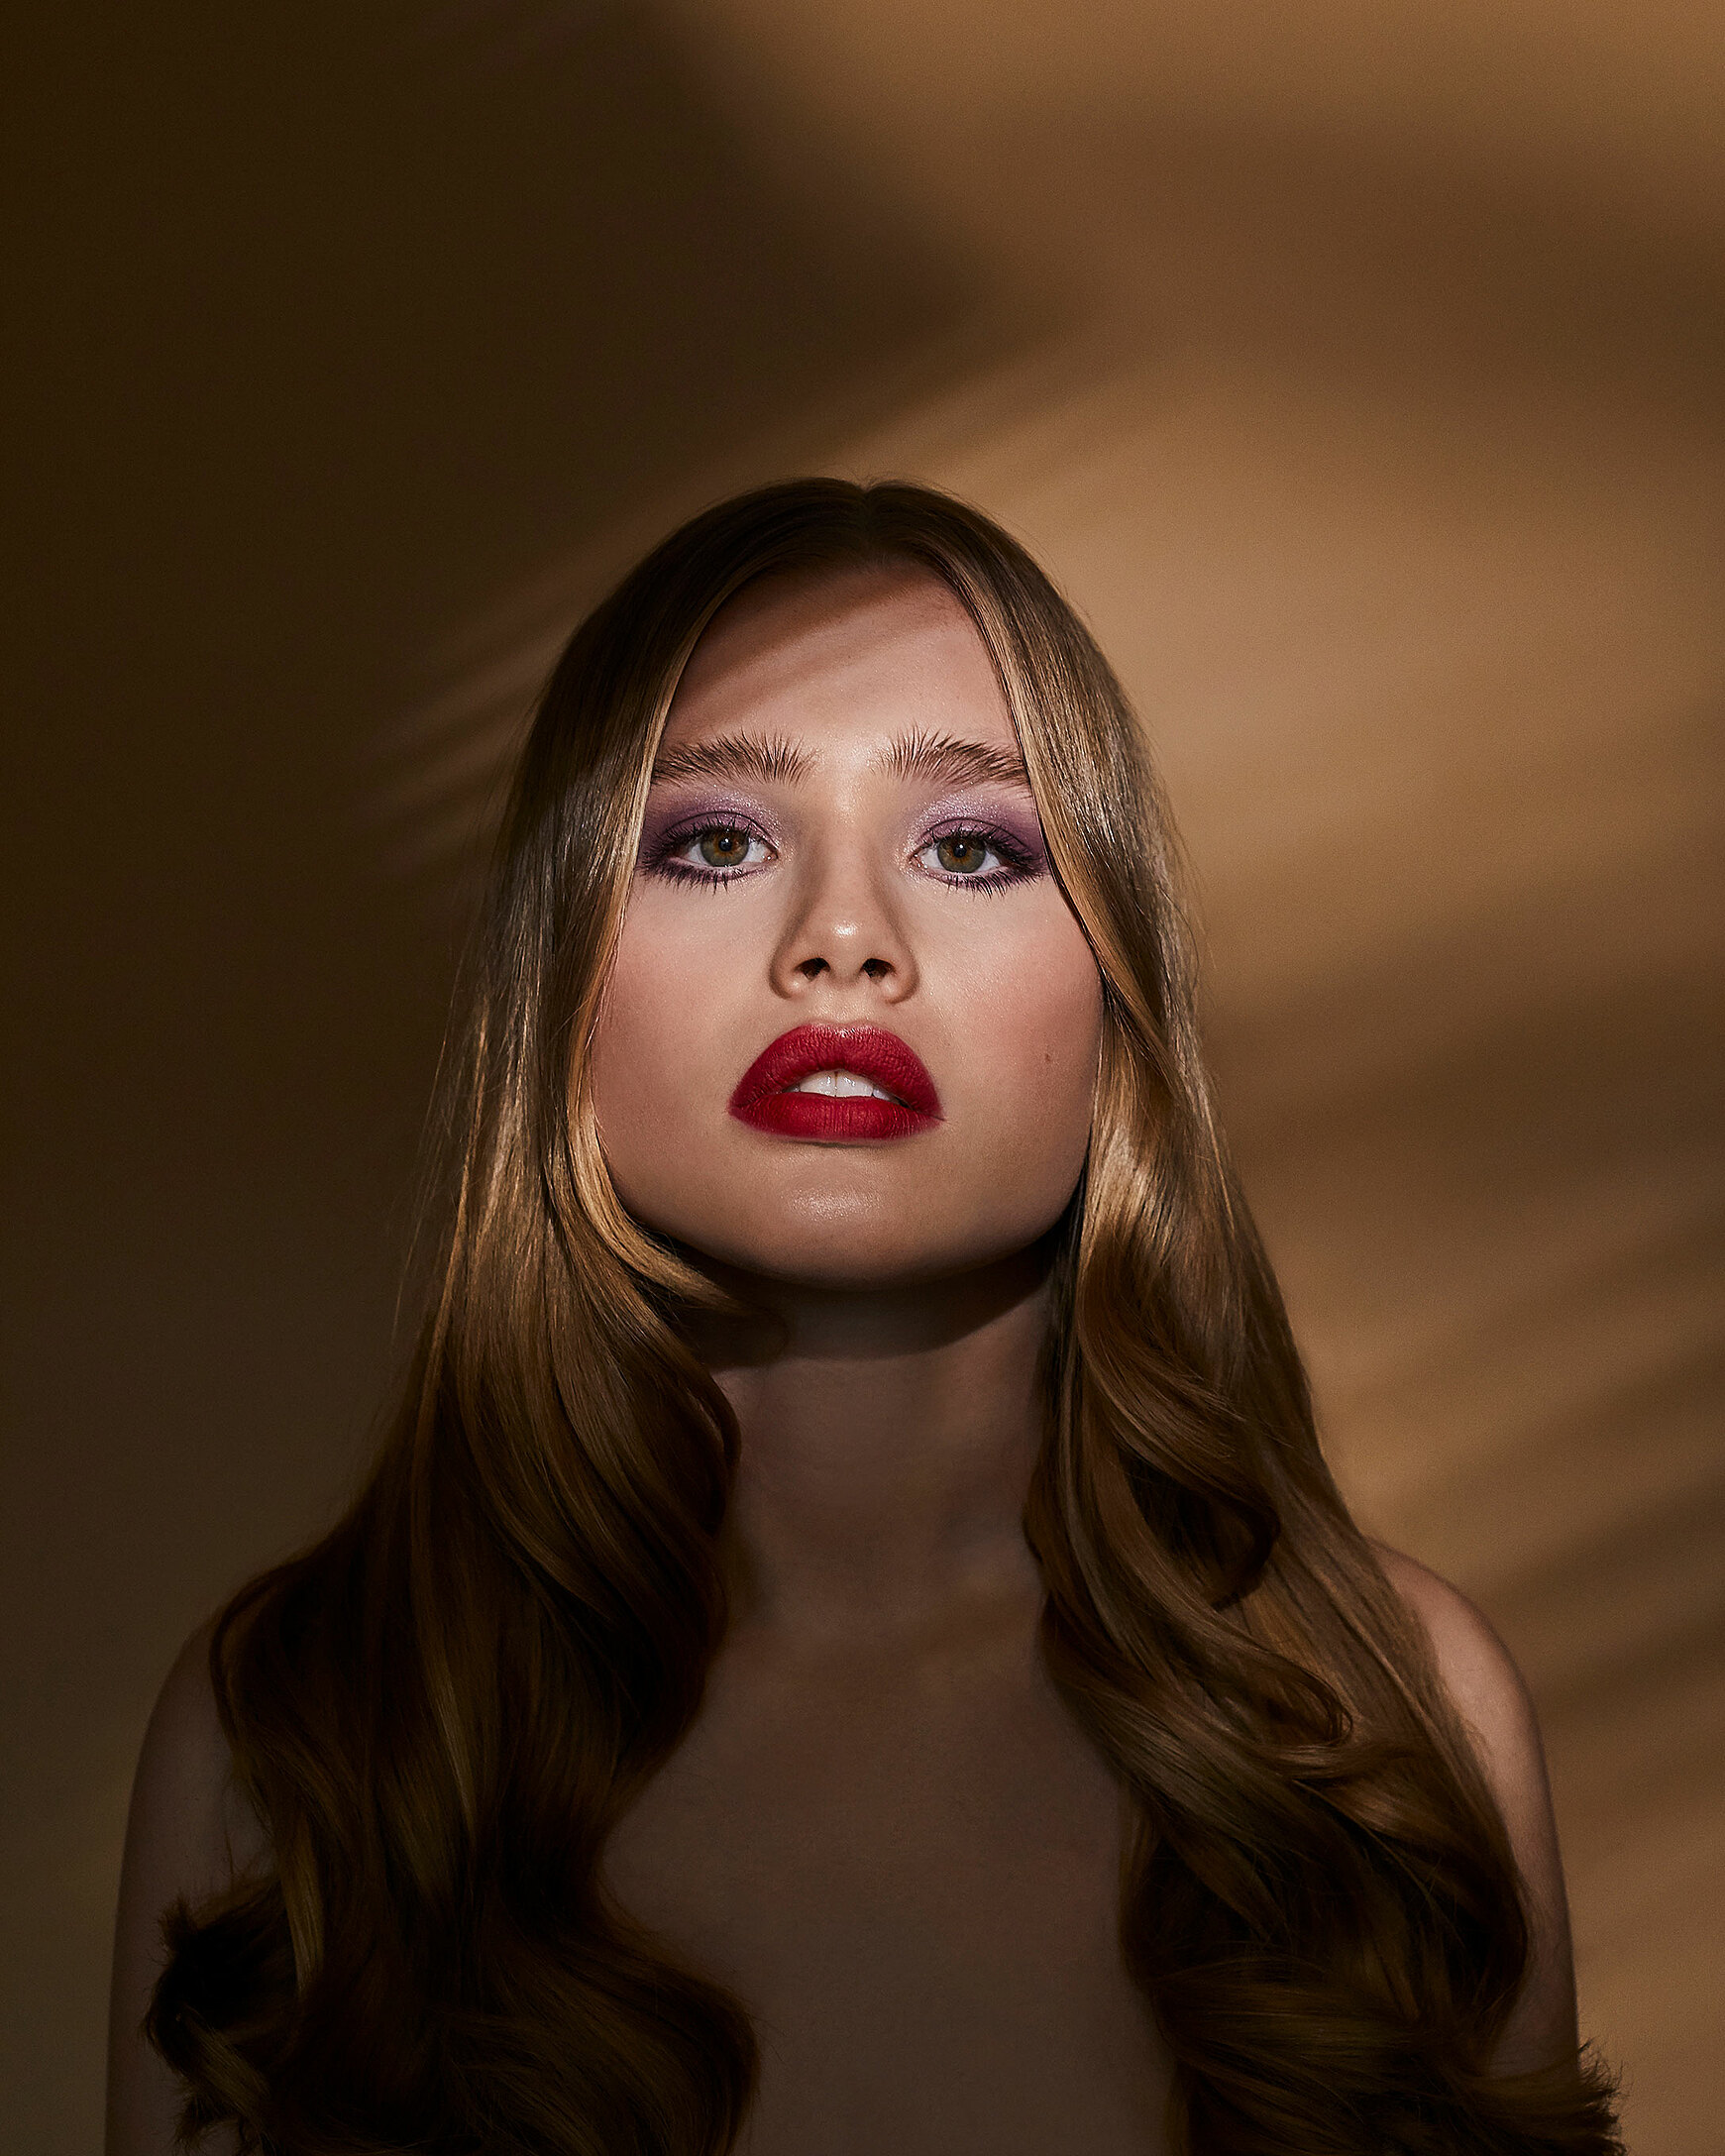 A female blonde model with red lips and purple eye shadow stand straight in front of the camera. The shadow is around her face